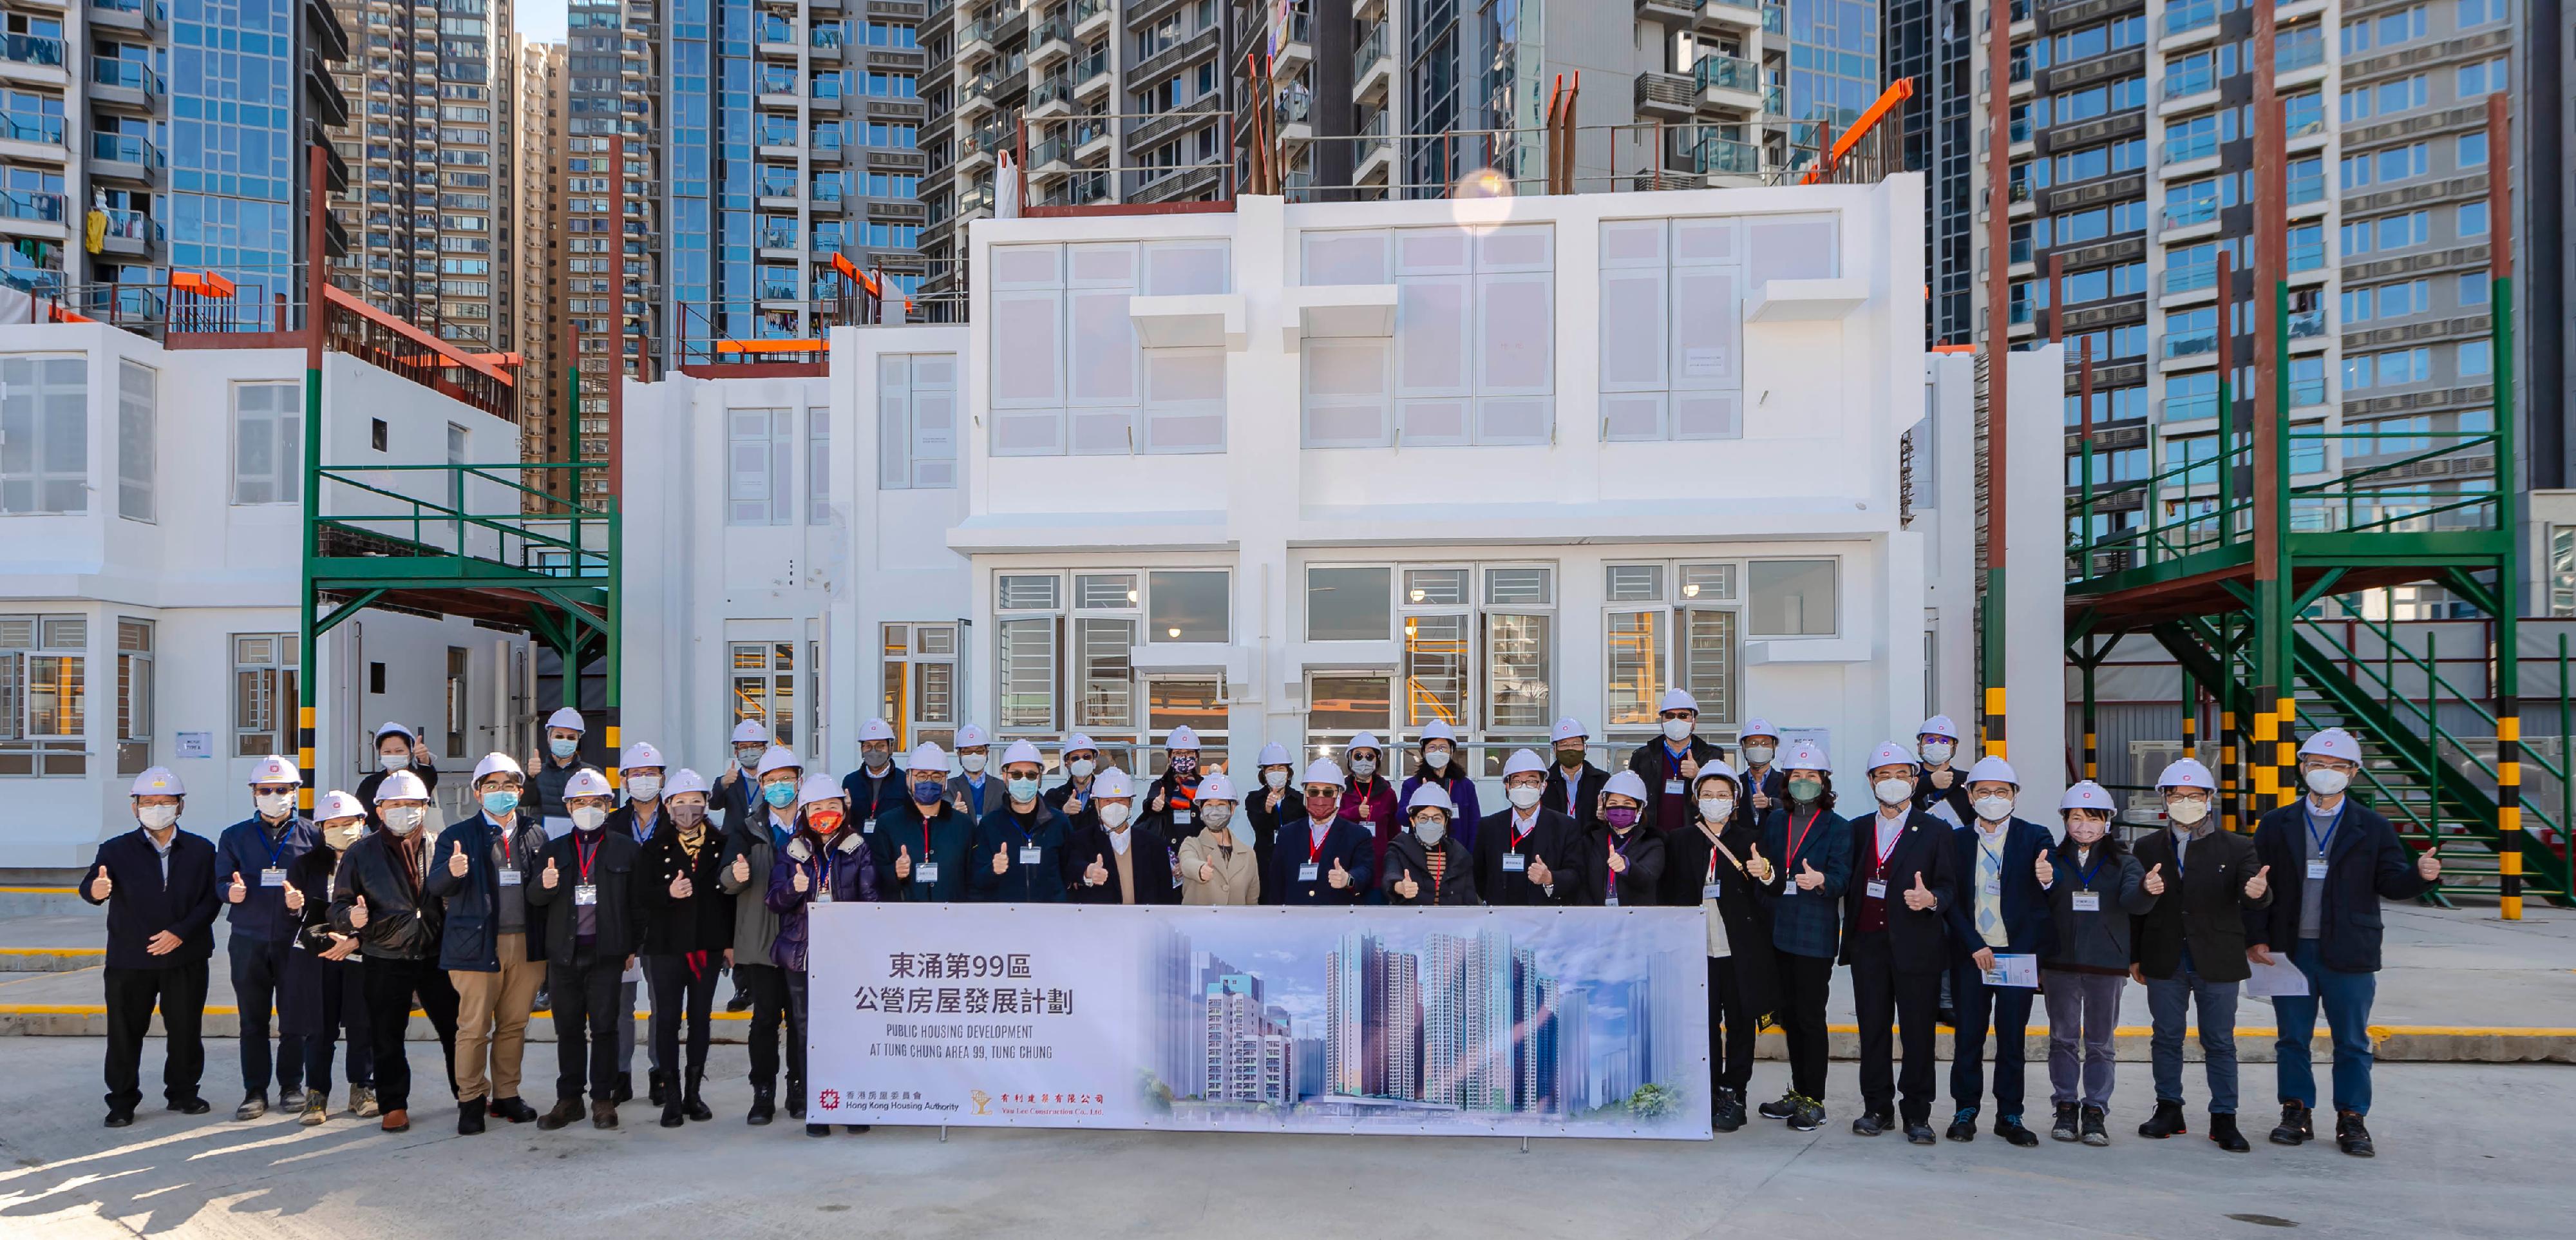 The Hong Kong Housing Authority (HA) arranged a media visit to the Modular Integrated Construction (MiC) mock-up for the public housing development at Tung Chung Area 99 today (March 31). Photo shows the Secretary for Housing cum HA Chairman, Ms Winnie Ho (front row, 12th right), and the Permanent Secretary for Housing cum Director of Housing, Miss Agnes Wong (front row, 10th right), with HA members at the MiC mock-up earlier.

